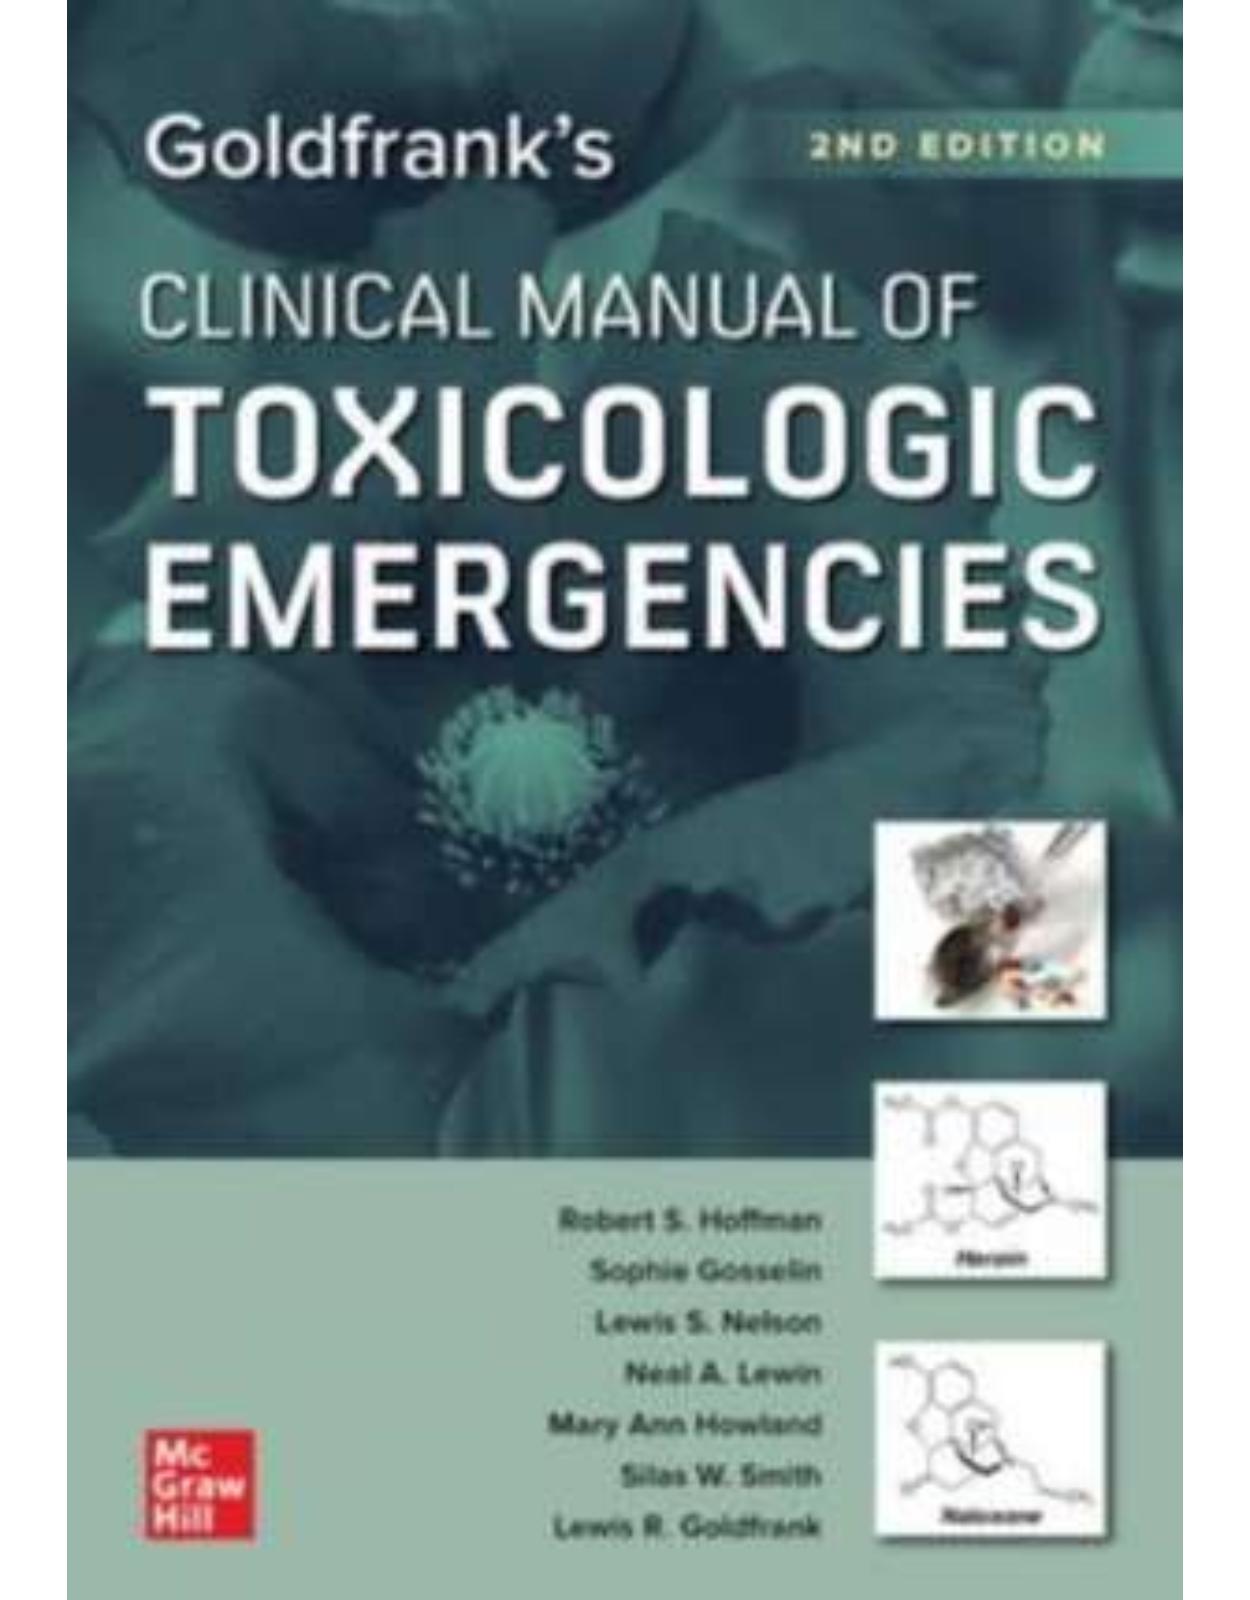 Goldfrank’s Clinical Manual of Toxicologic Emergencies, Second Edition